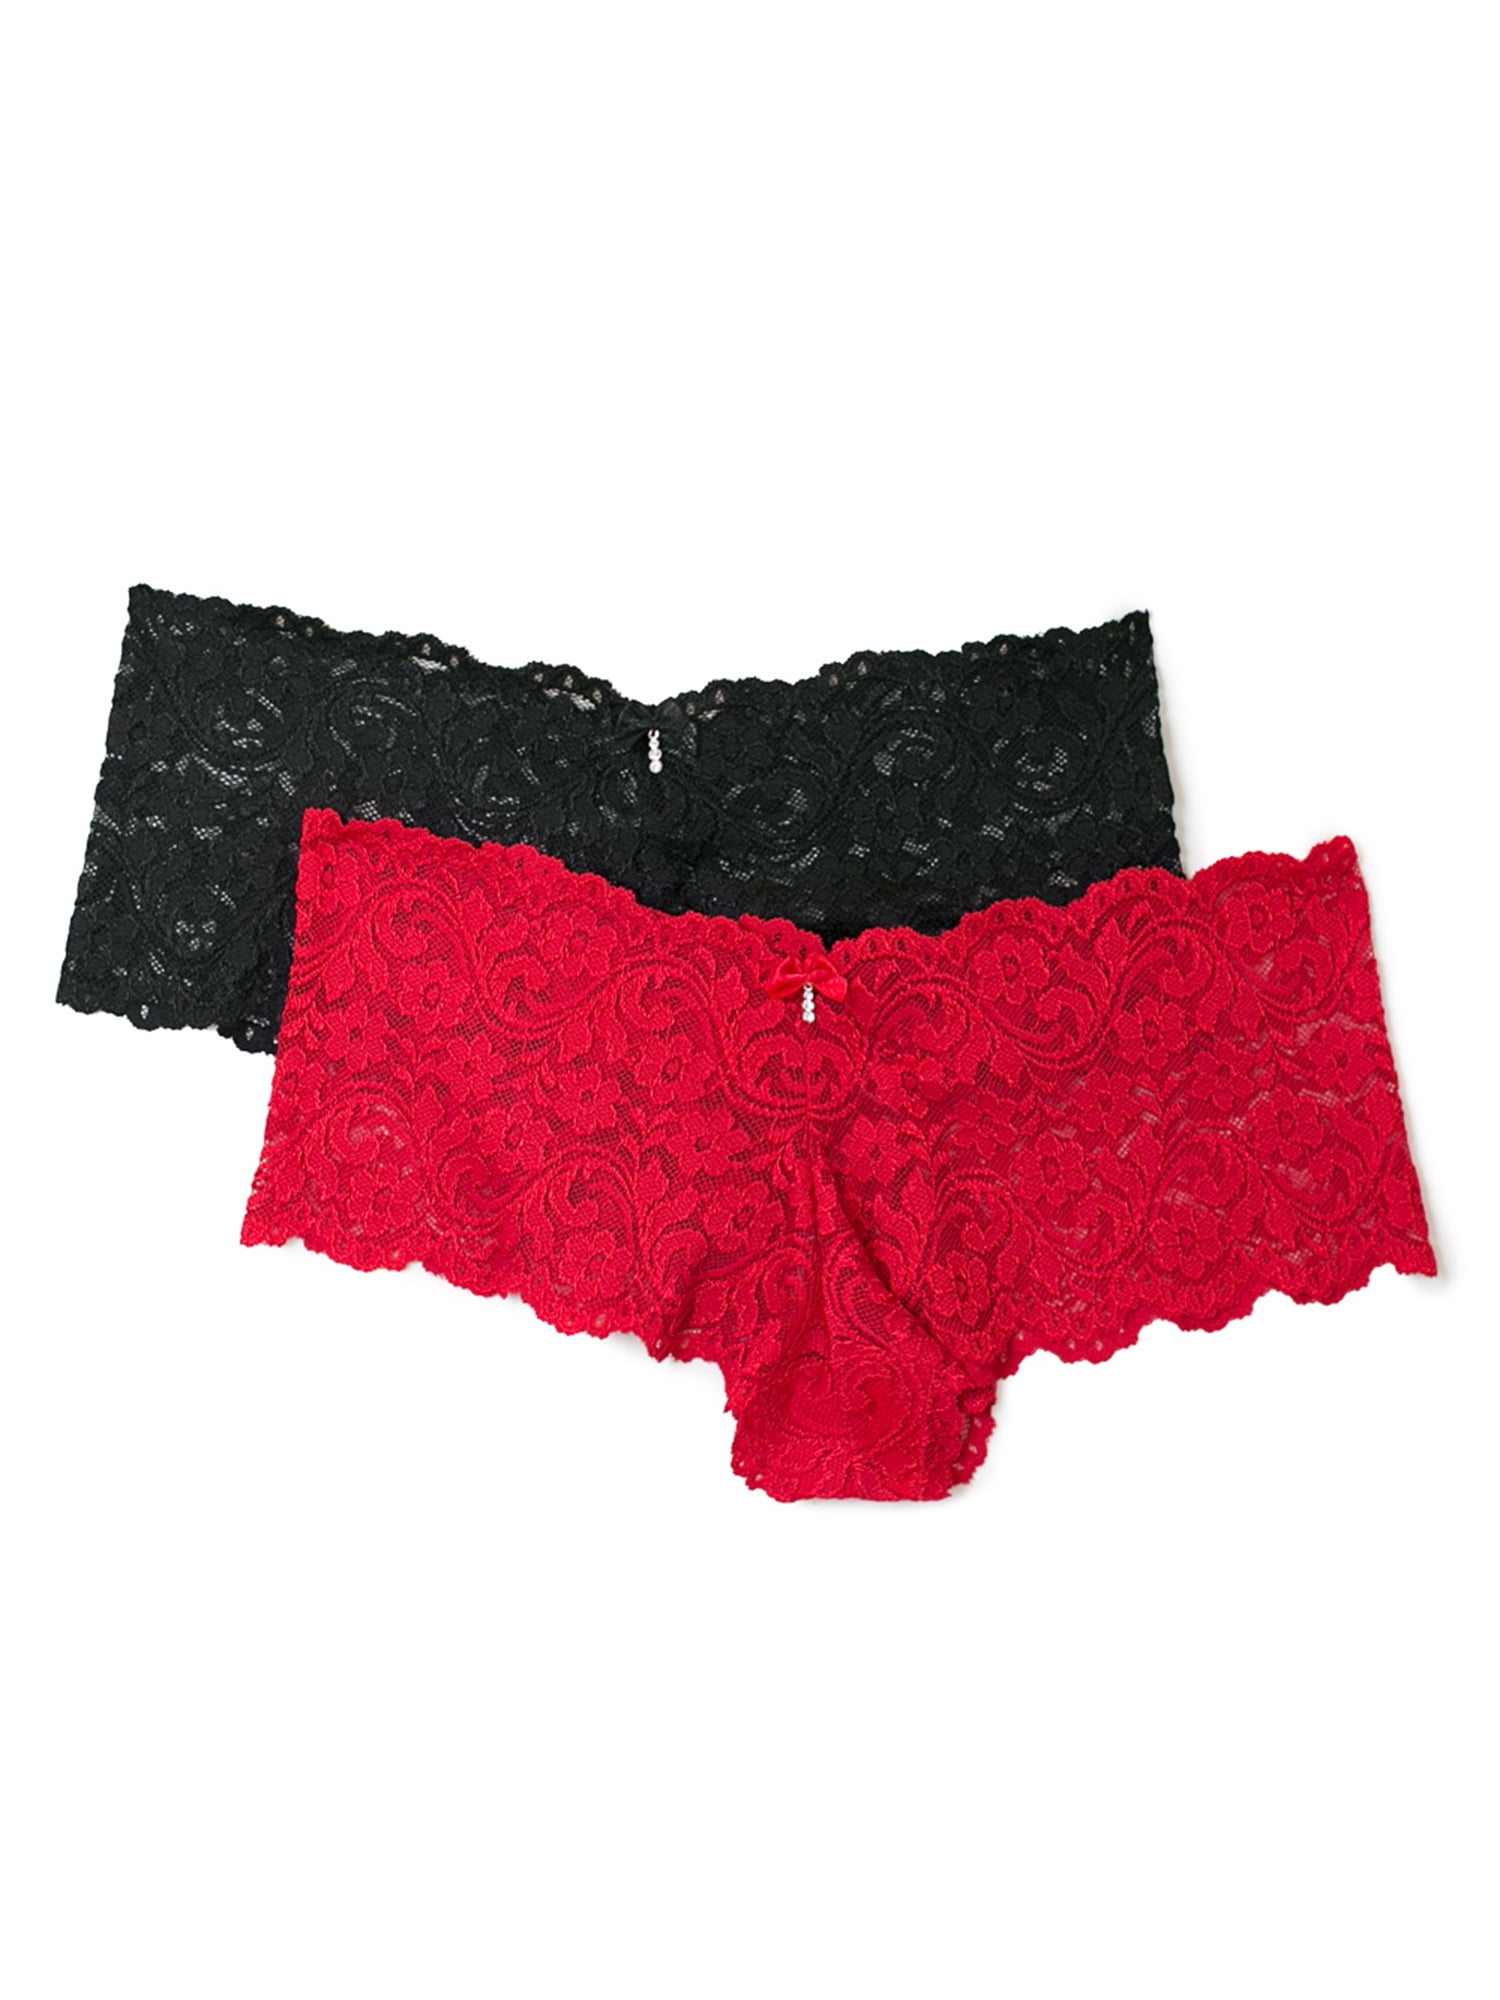 Lace Cheeky Panty- Tango Red - Chérie Amour